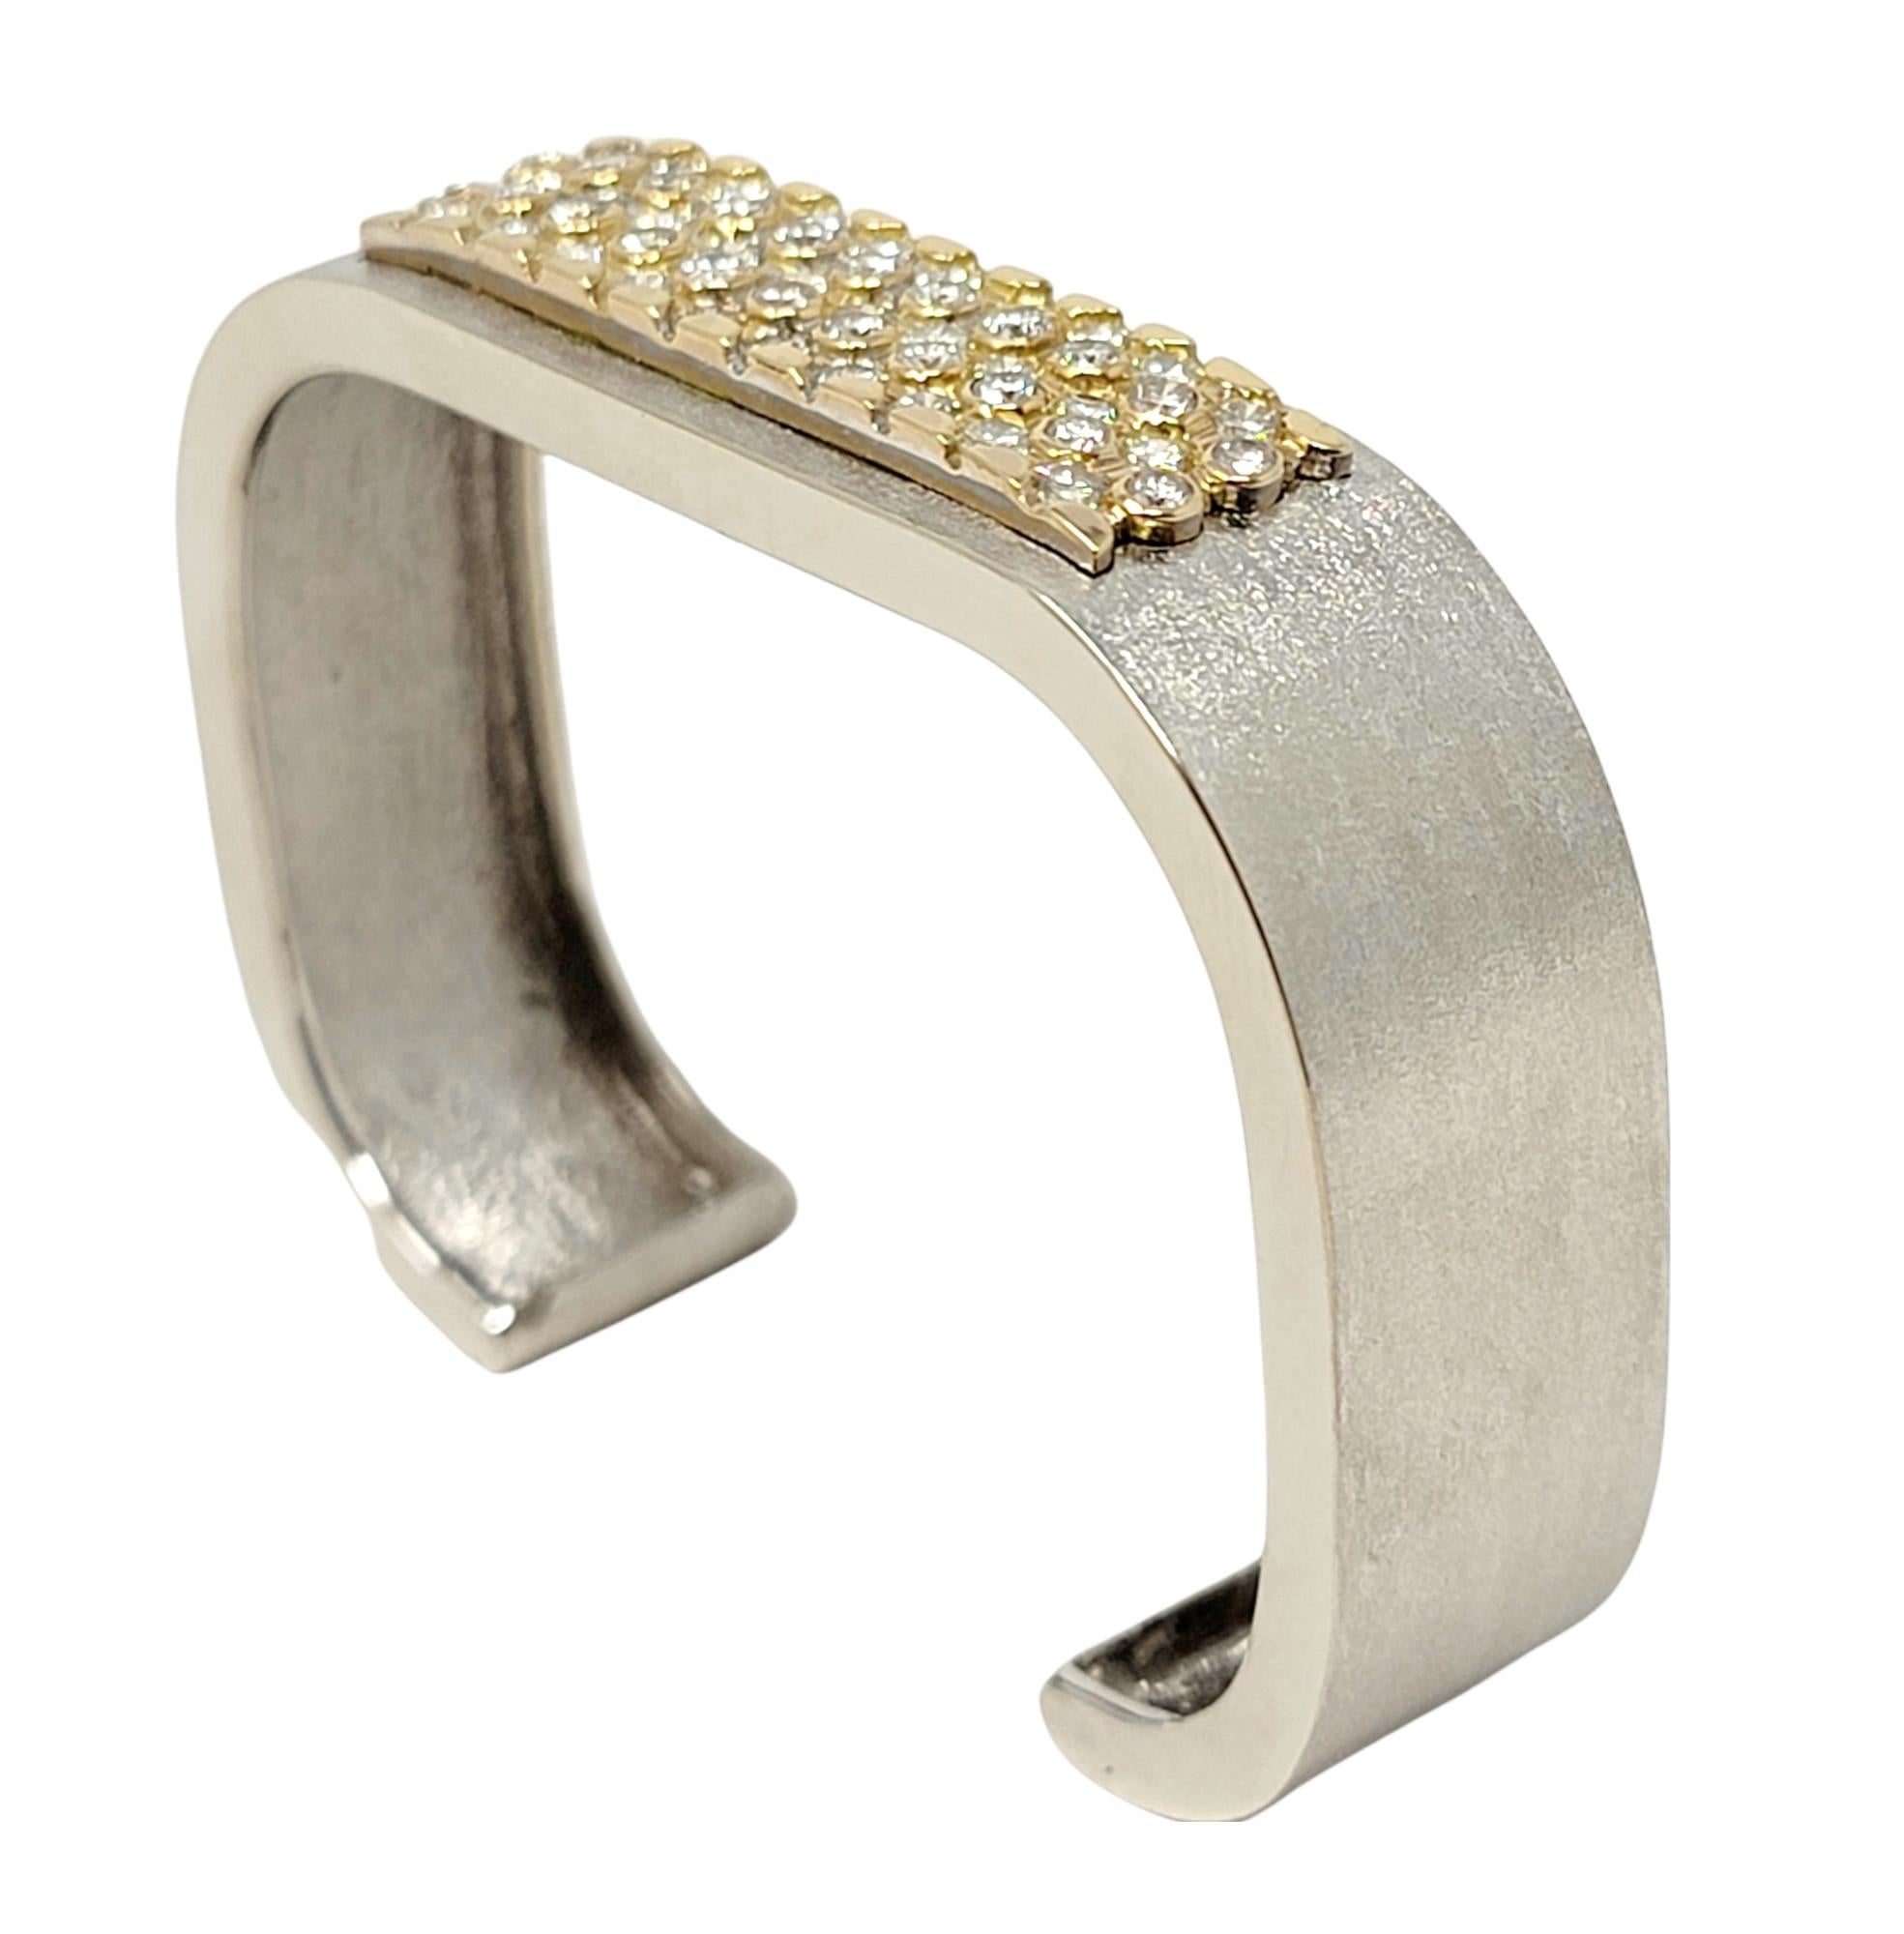 Breathtaking contemporary diamond cuff bracelet shimmers beautifully on the wrist. This stunning piece features a slightly squared design with a modern brushed gold finish. The 52 glittering round brilliant diamonds are arranged in 5 alternating